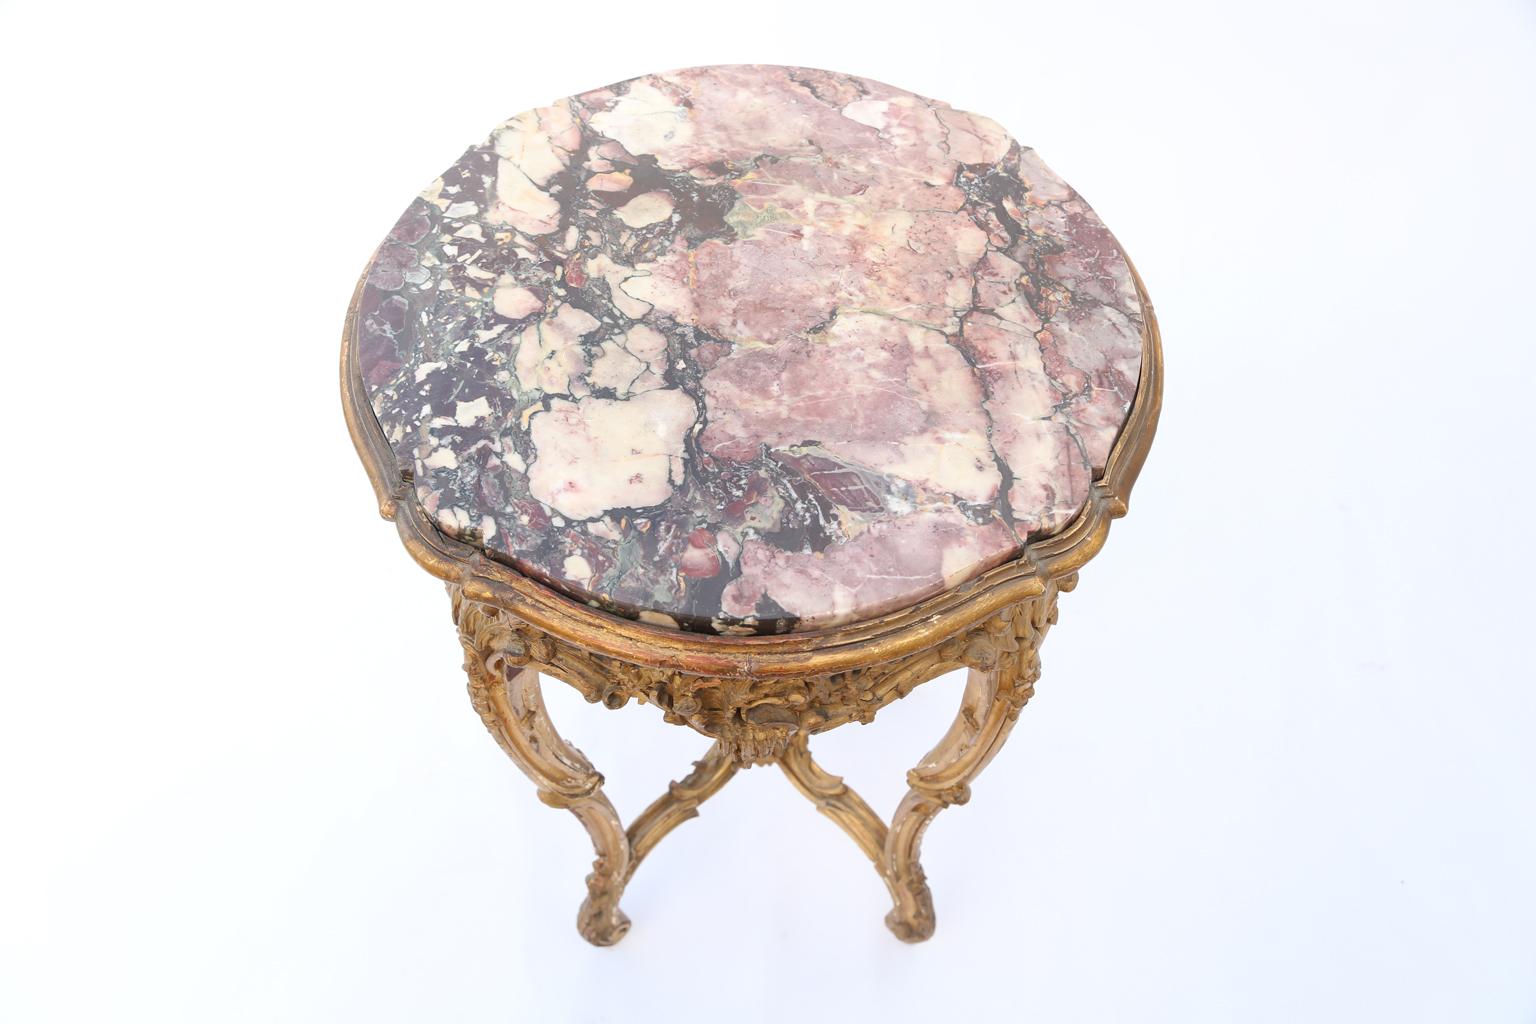 Carved French Giltwood Occasional Table with Rouge Marble Top, 19th Century